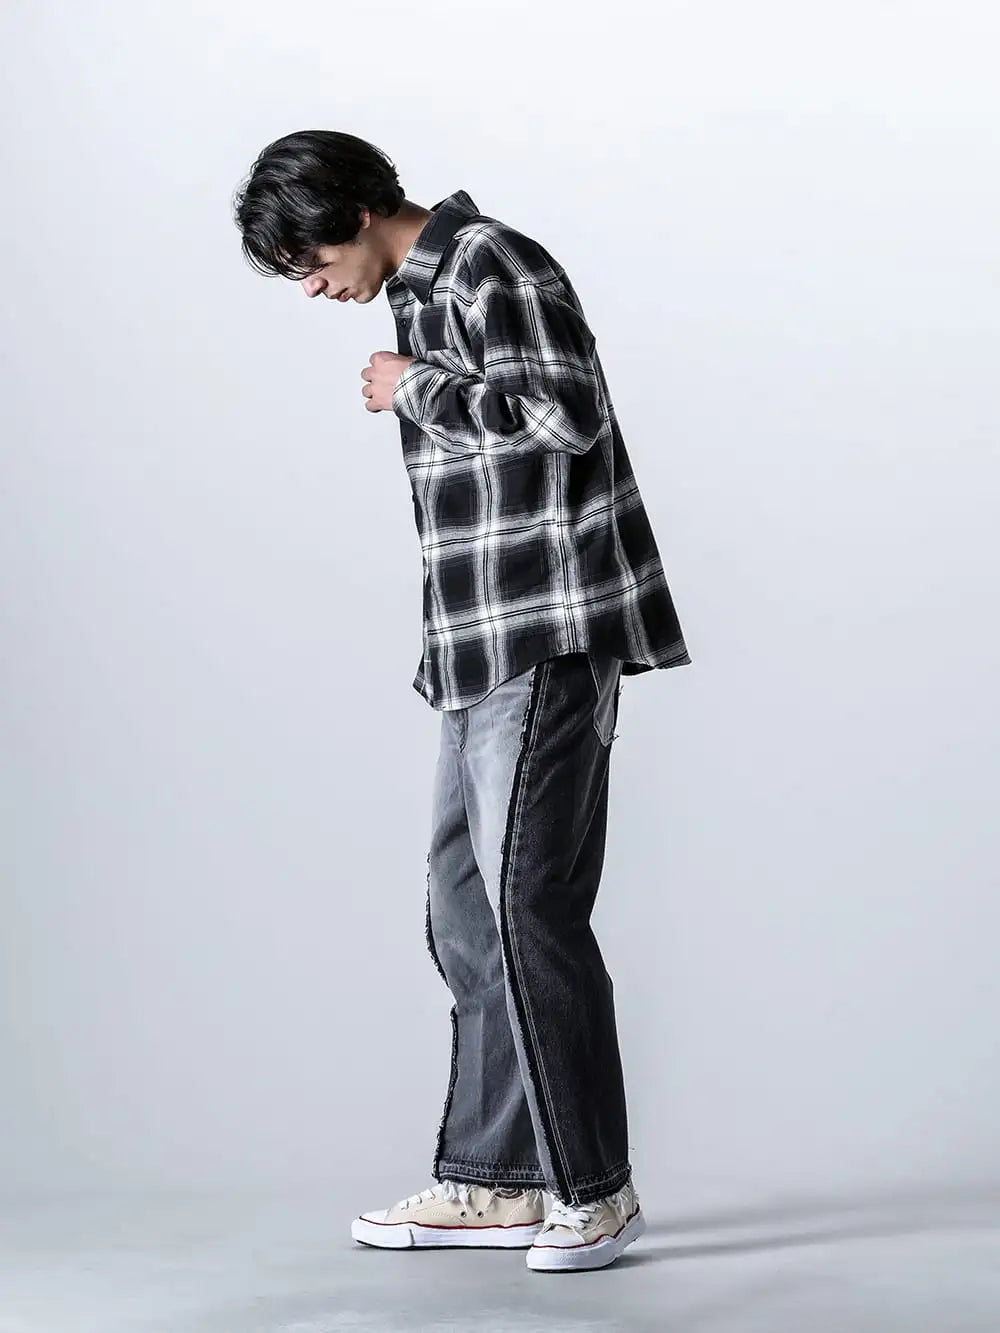 RAFU 24SS STYLING - A monotone-based coordinate with an overflowing sense of unity - Rafu008-Docking shirt black - 16102-Black_CL-Twisted 3D sarouel denim black CL - A04FW729-Original sole canvas low-cut sneakers 1-002